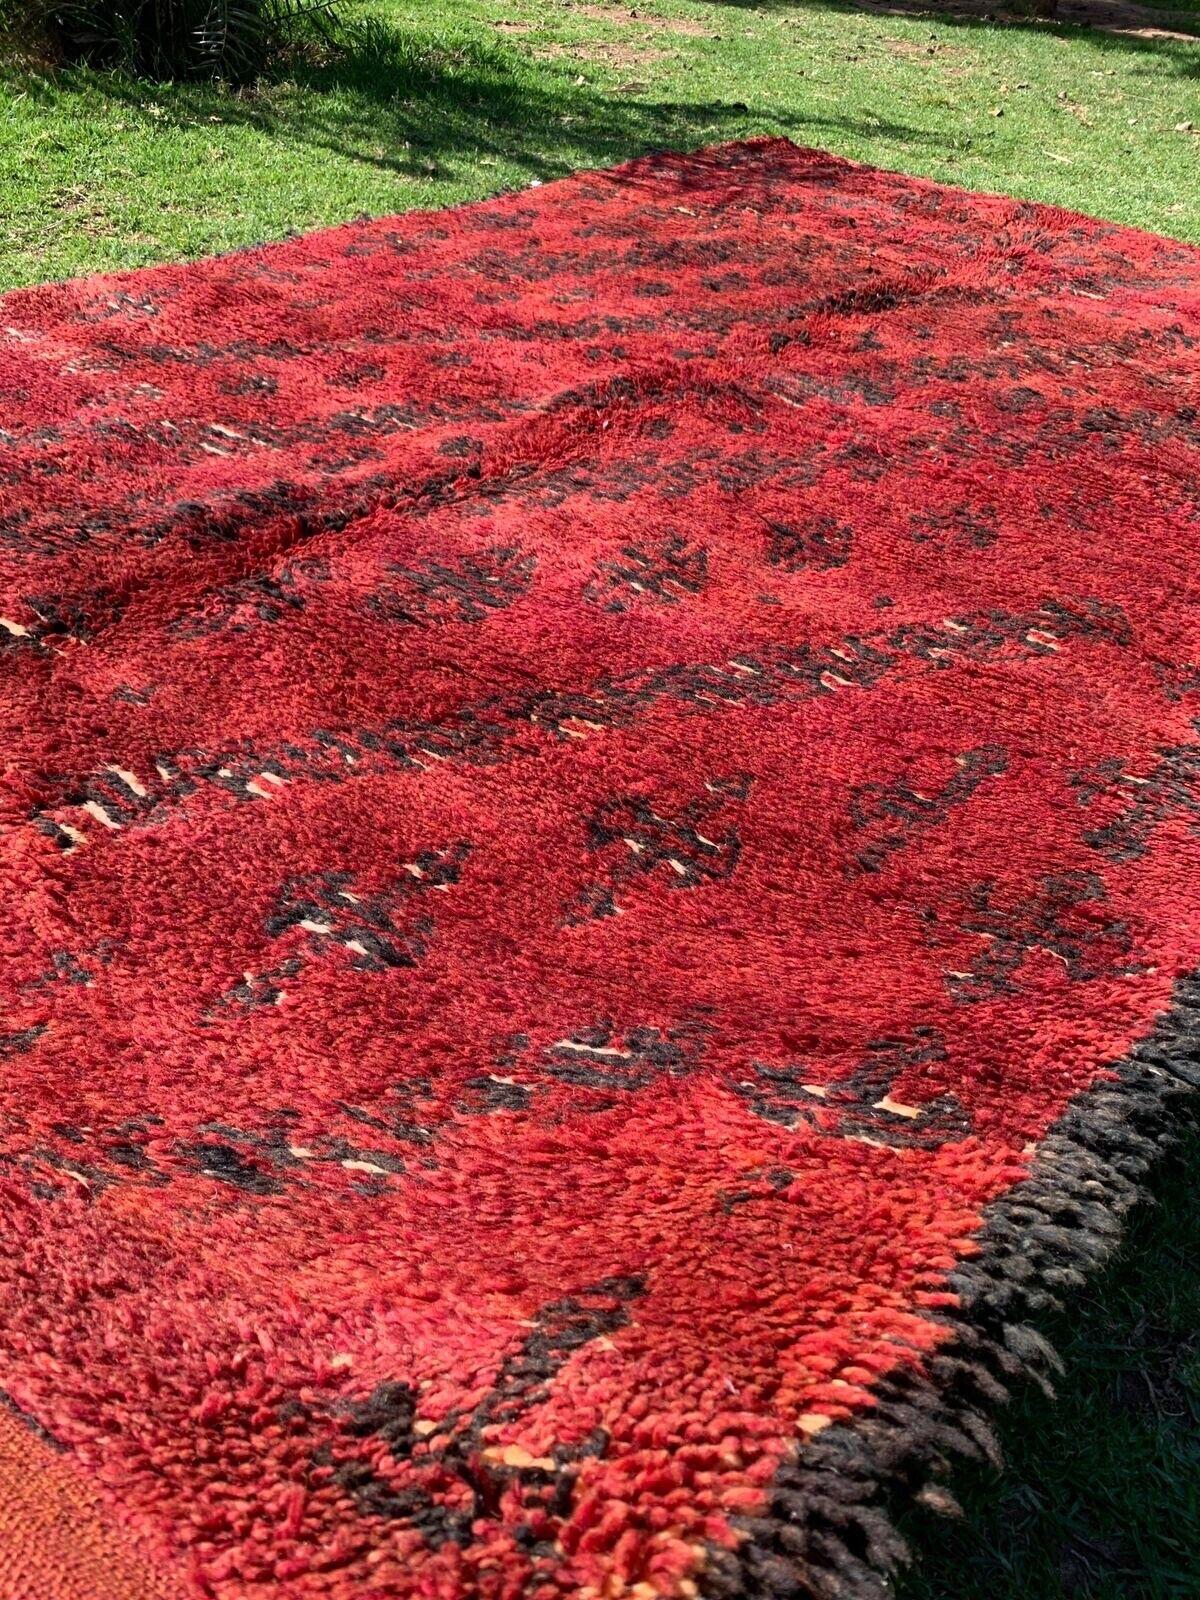 Late 20th Century Handmade Vintage Moroccan Berber Red Rug 6.5' x 10.8', 1980s - 1G06 For Sale